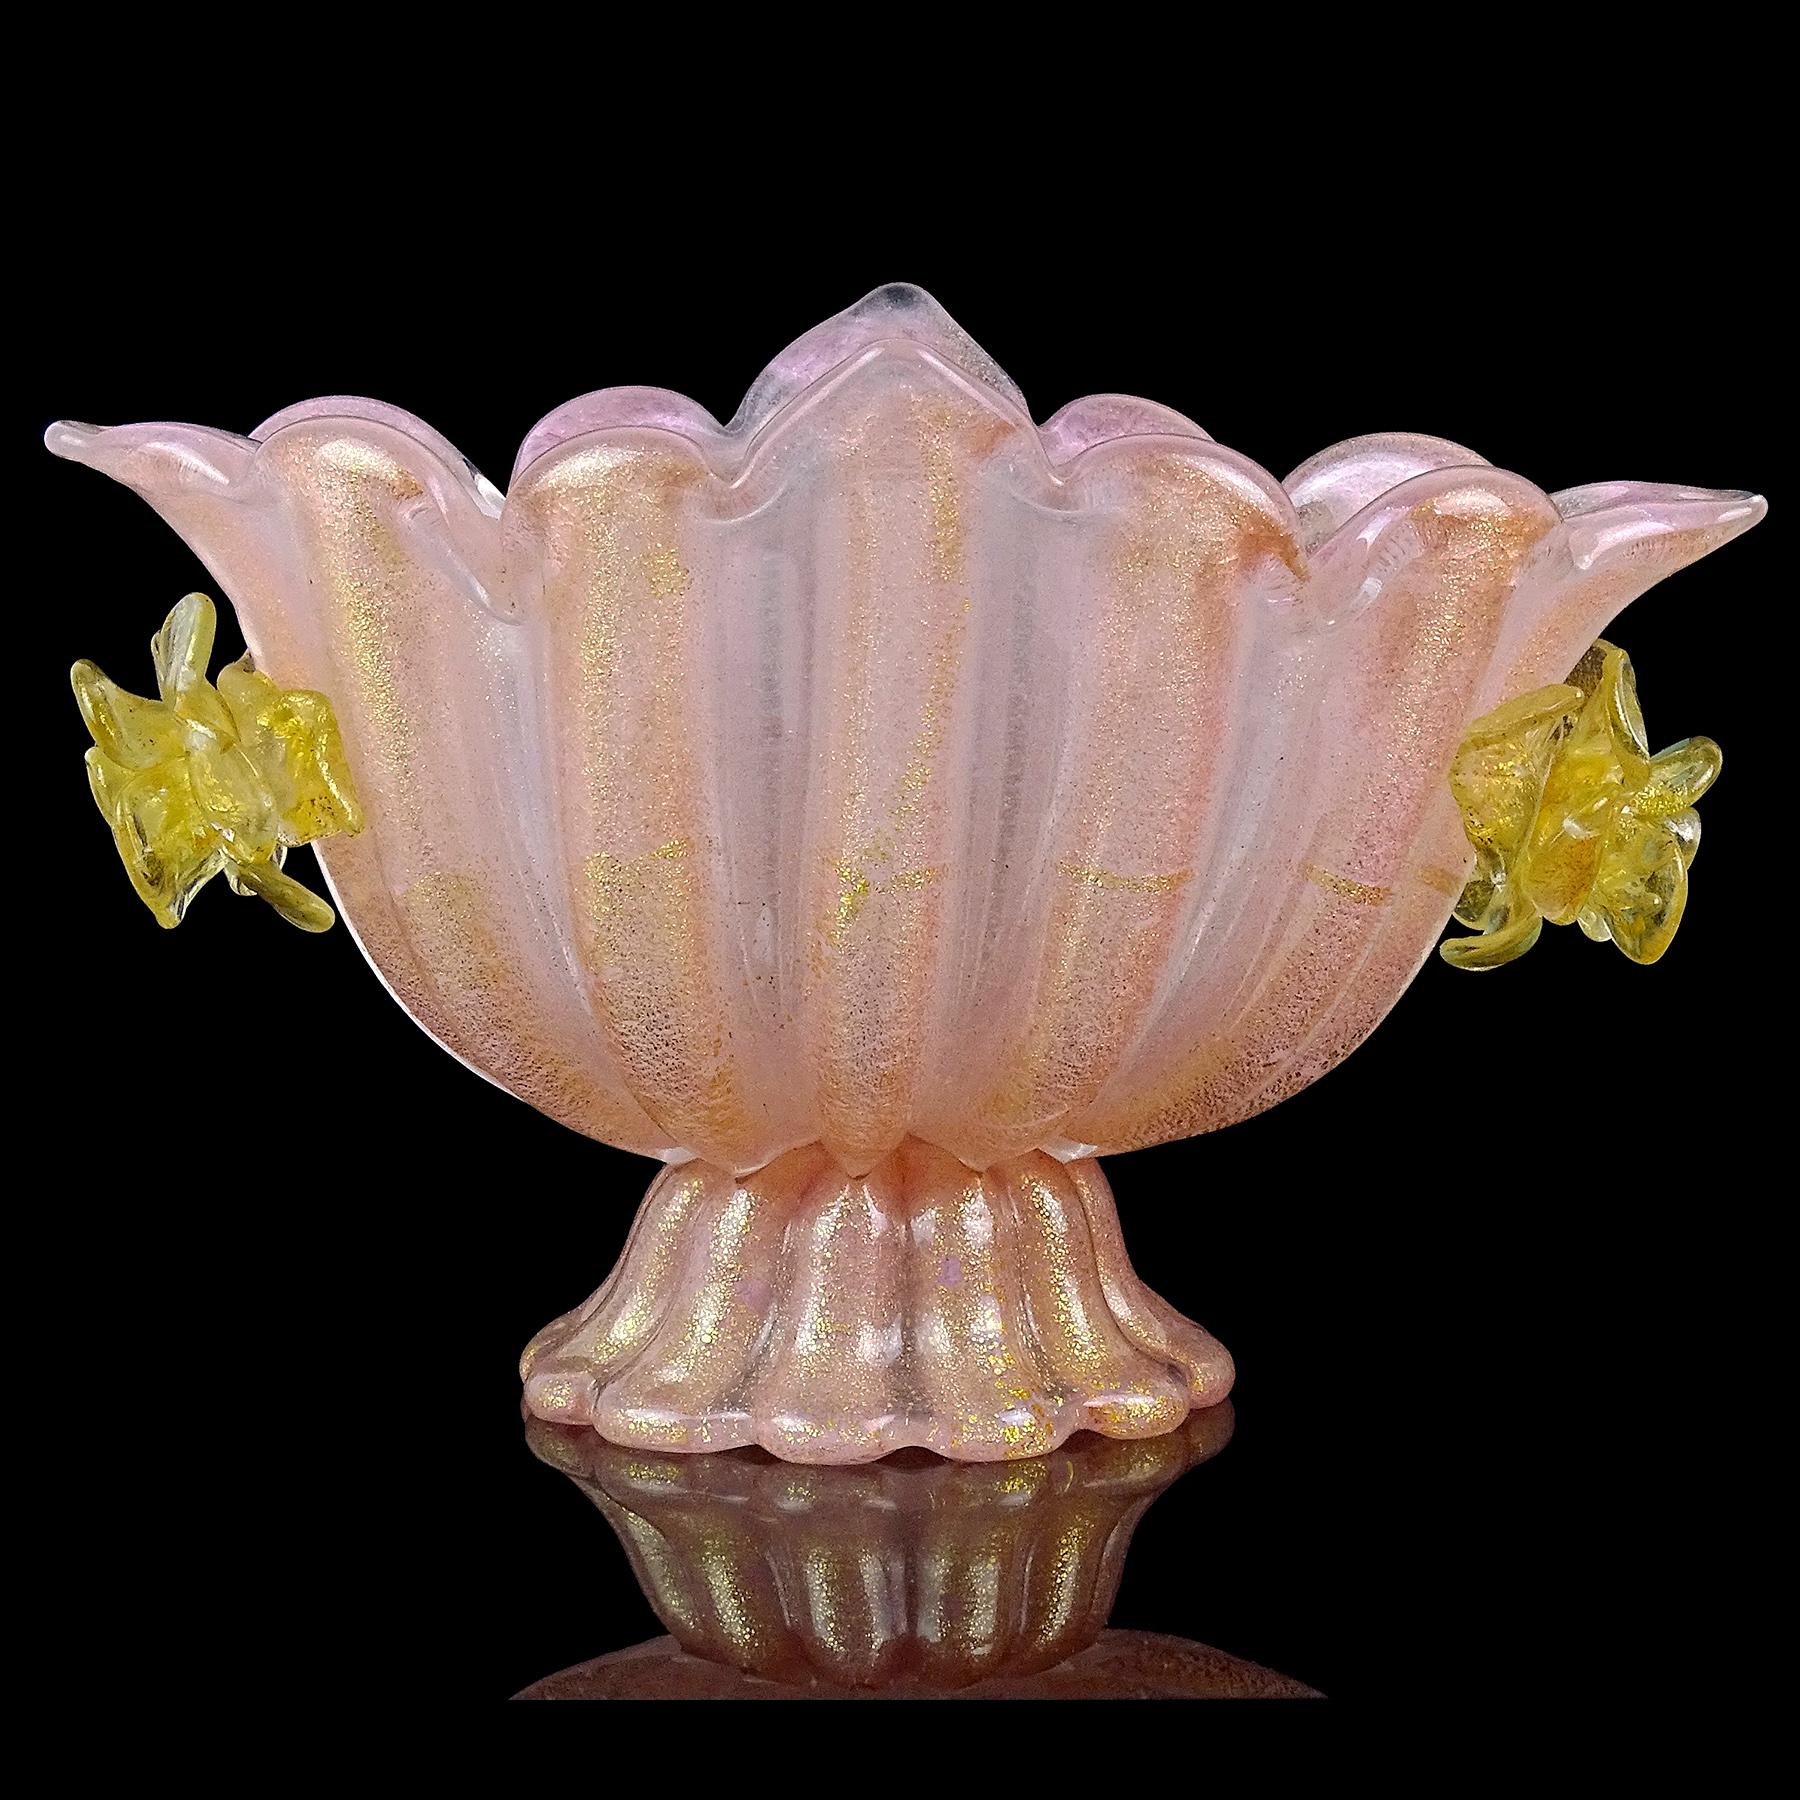 Gorgeous vintage Murano hand blown pink and gold flecks Italian art glass footed compote bowl. Attributed to designer Ercole Barovier for the Barovier e Toso workshop. Created in the 